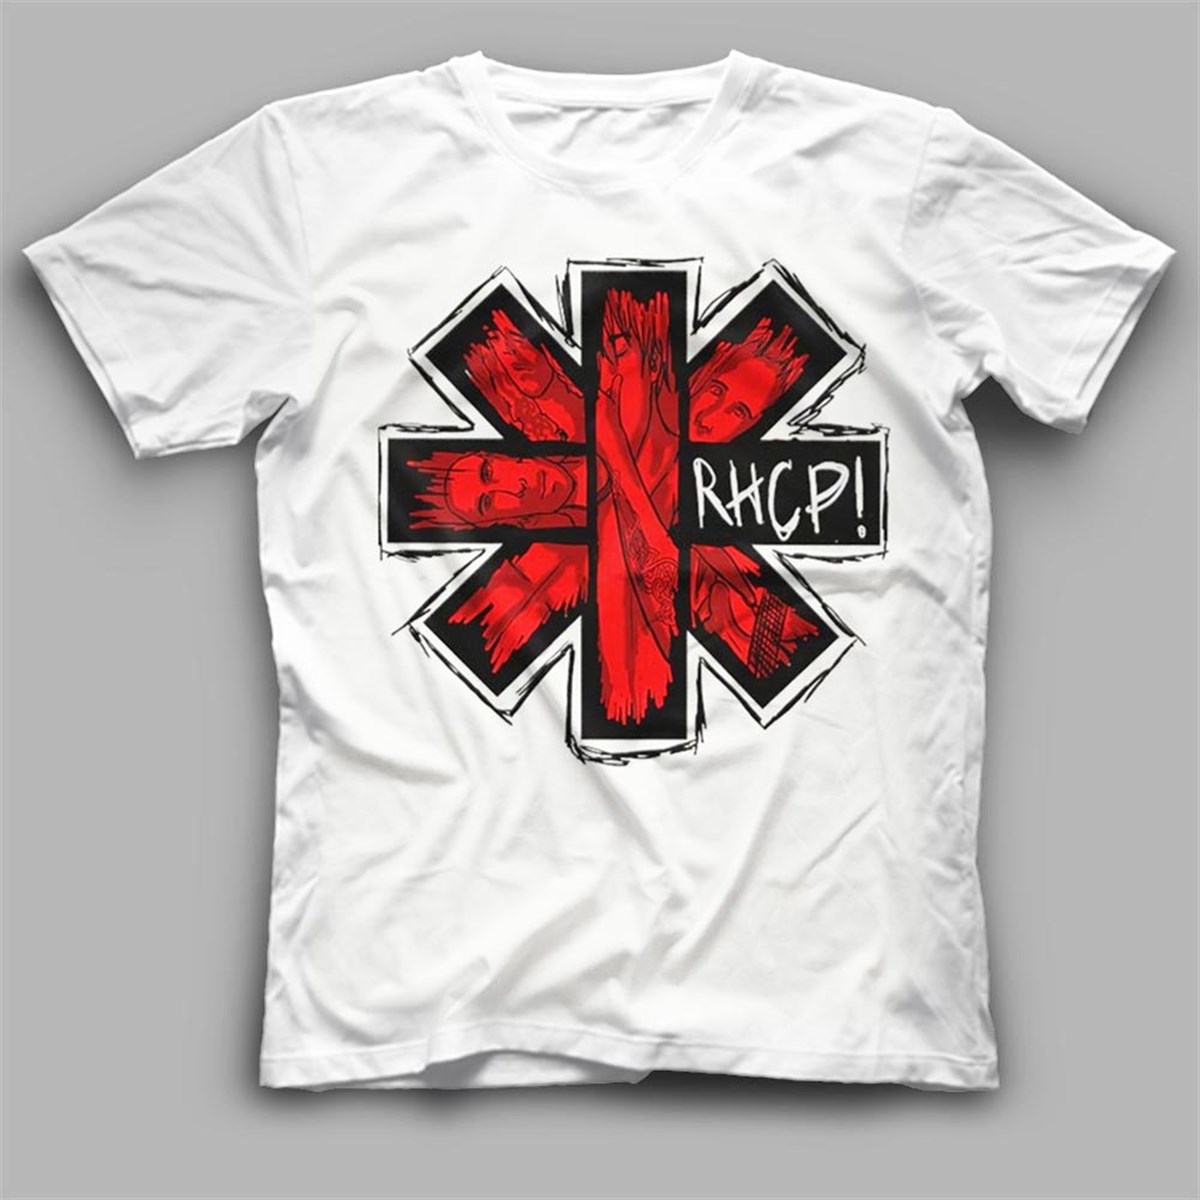 red hot chili peppers tshirt